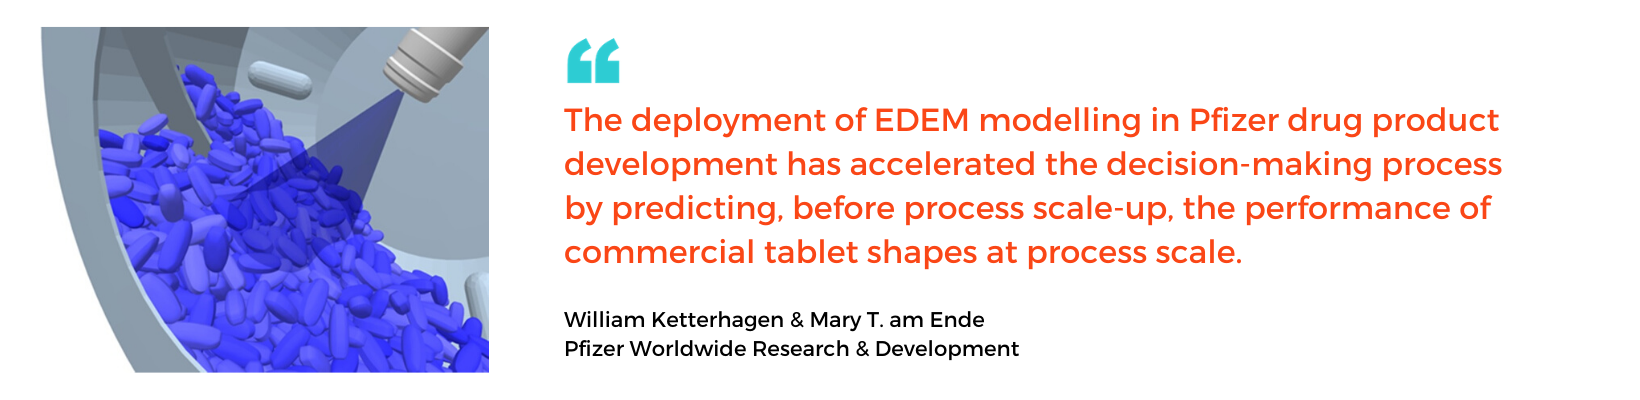 optimizing pharmaceutical manufacturing processes with edem resources